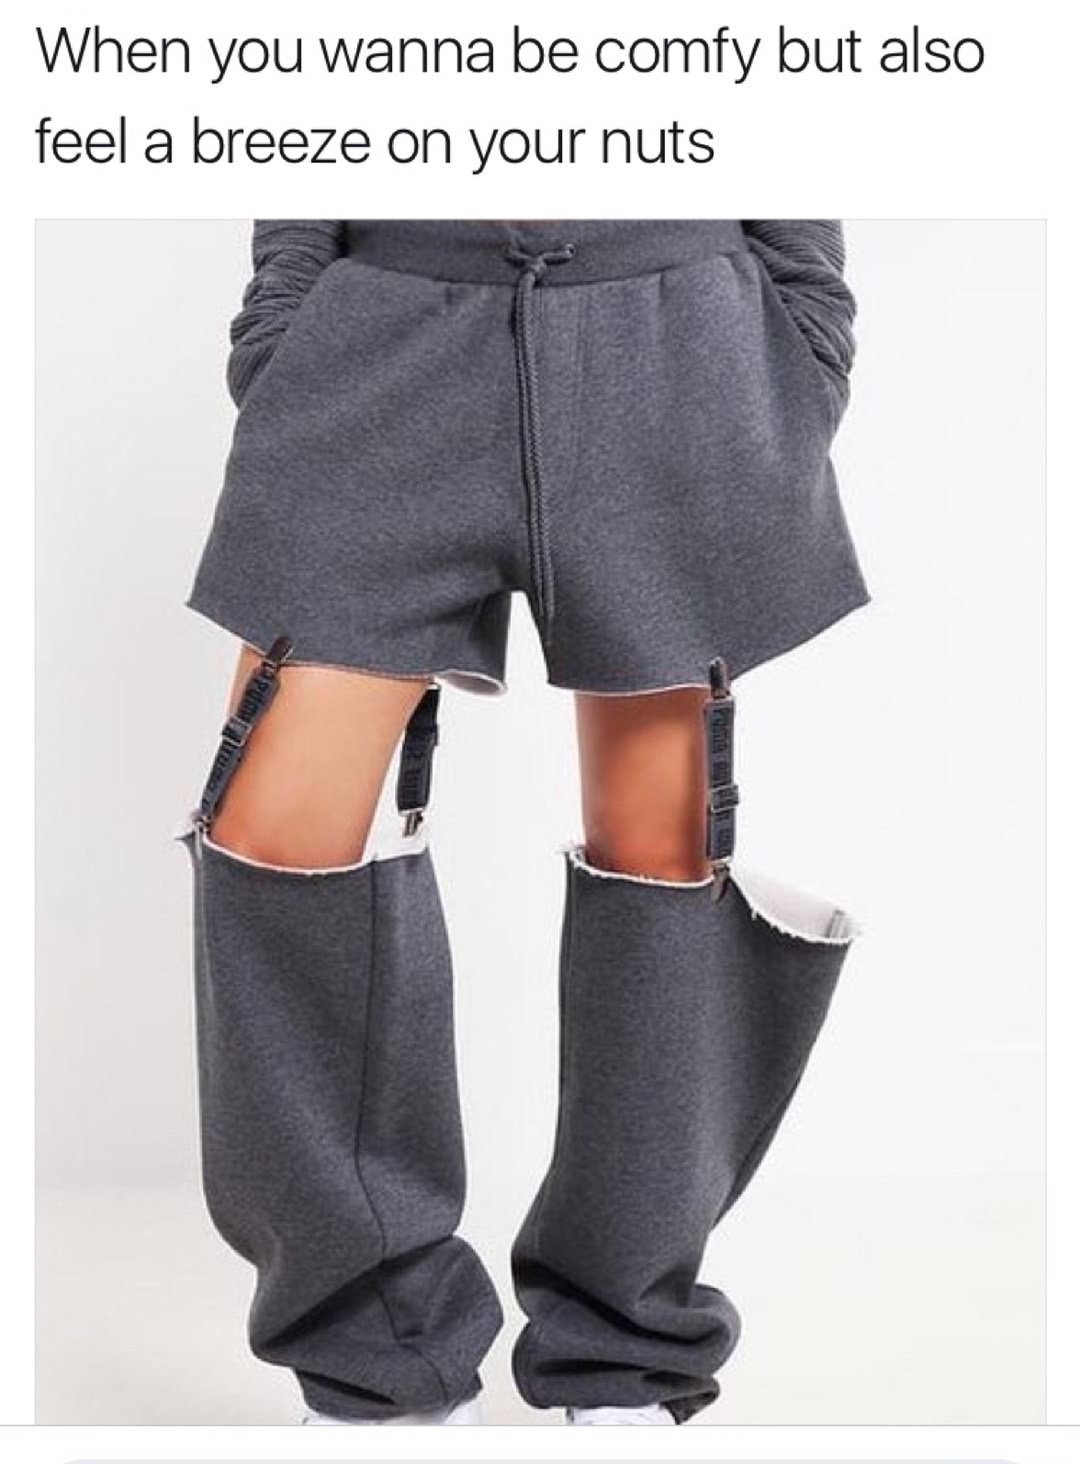 ridiculous asos clothing - When you wanna be comfy but also feel a breeze on your nuts